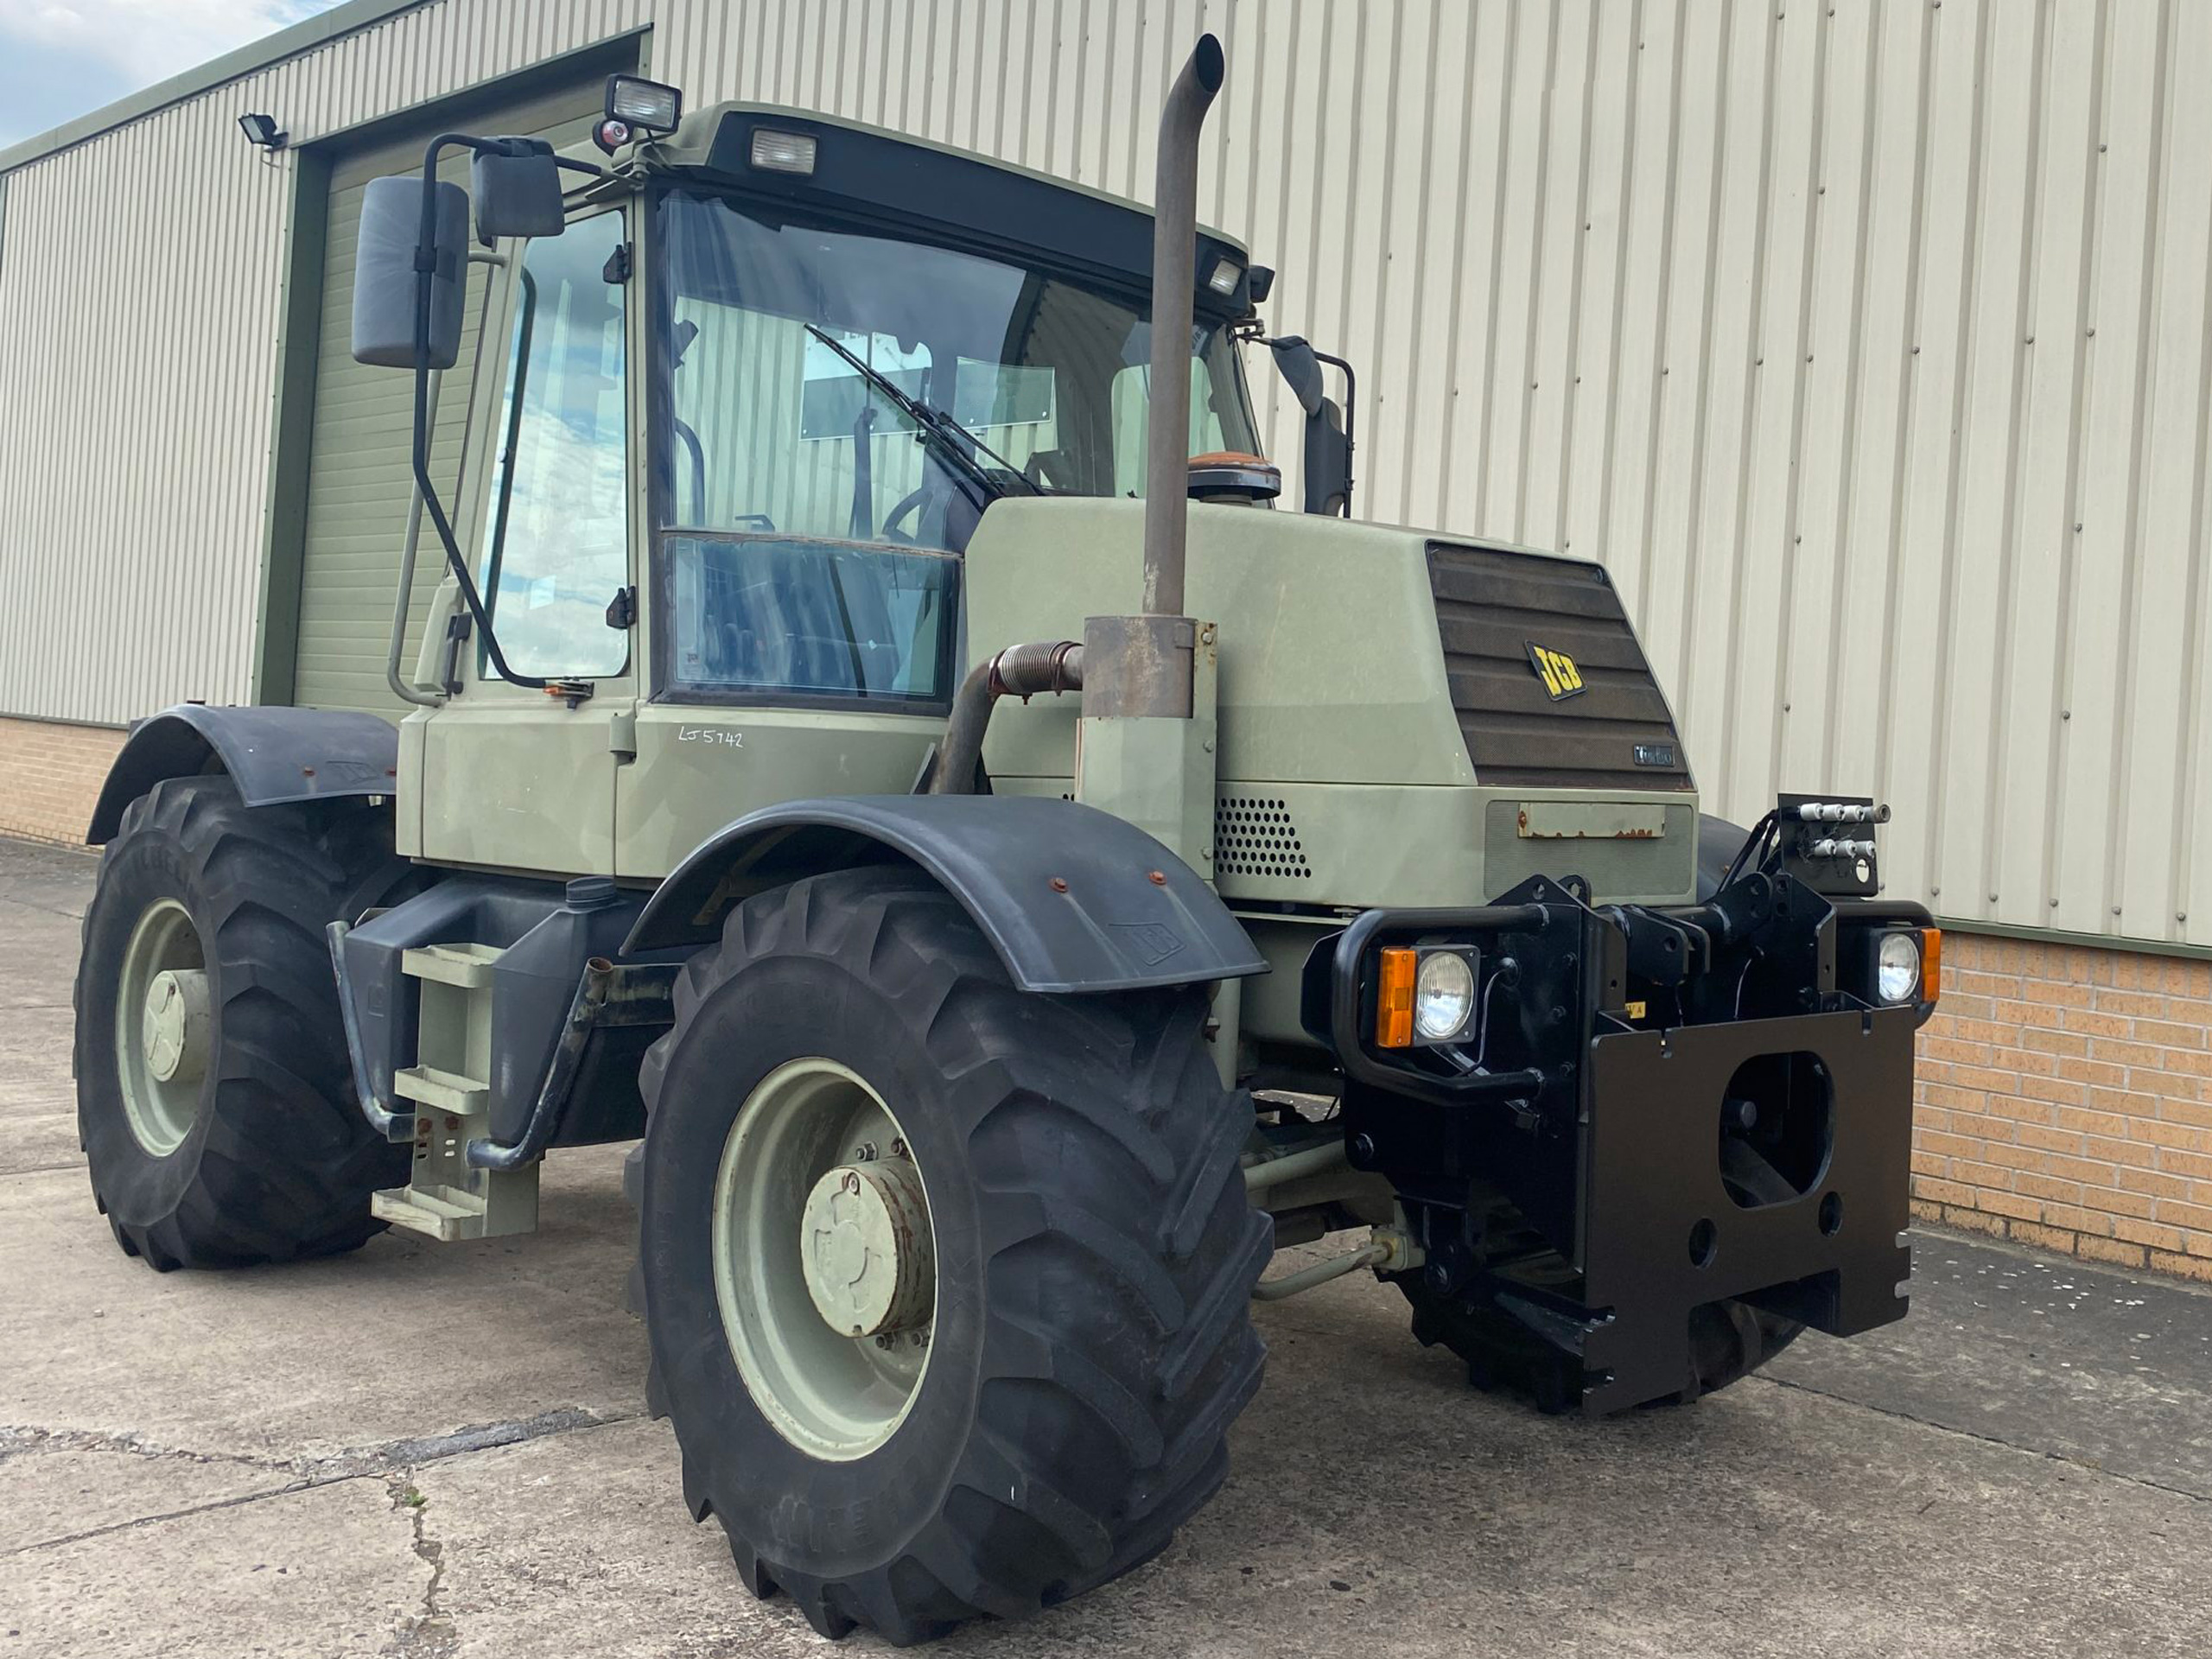 JCB fastrac 150T 80 ex MoD - 50398 - Govsales of mod surplus ex army trucks, ex army land rovers and other military vehicles for sale